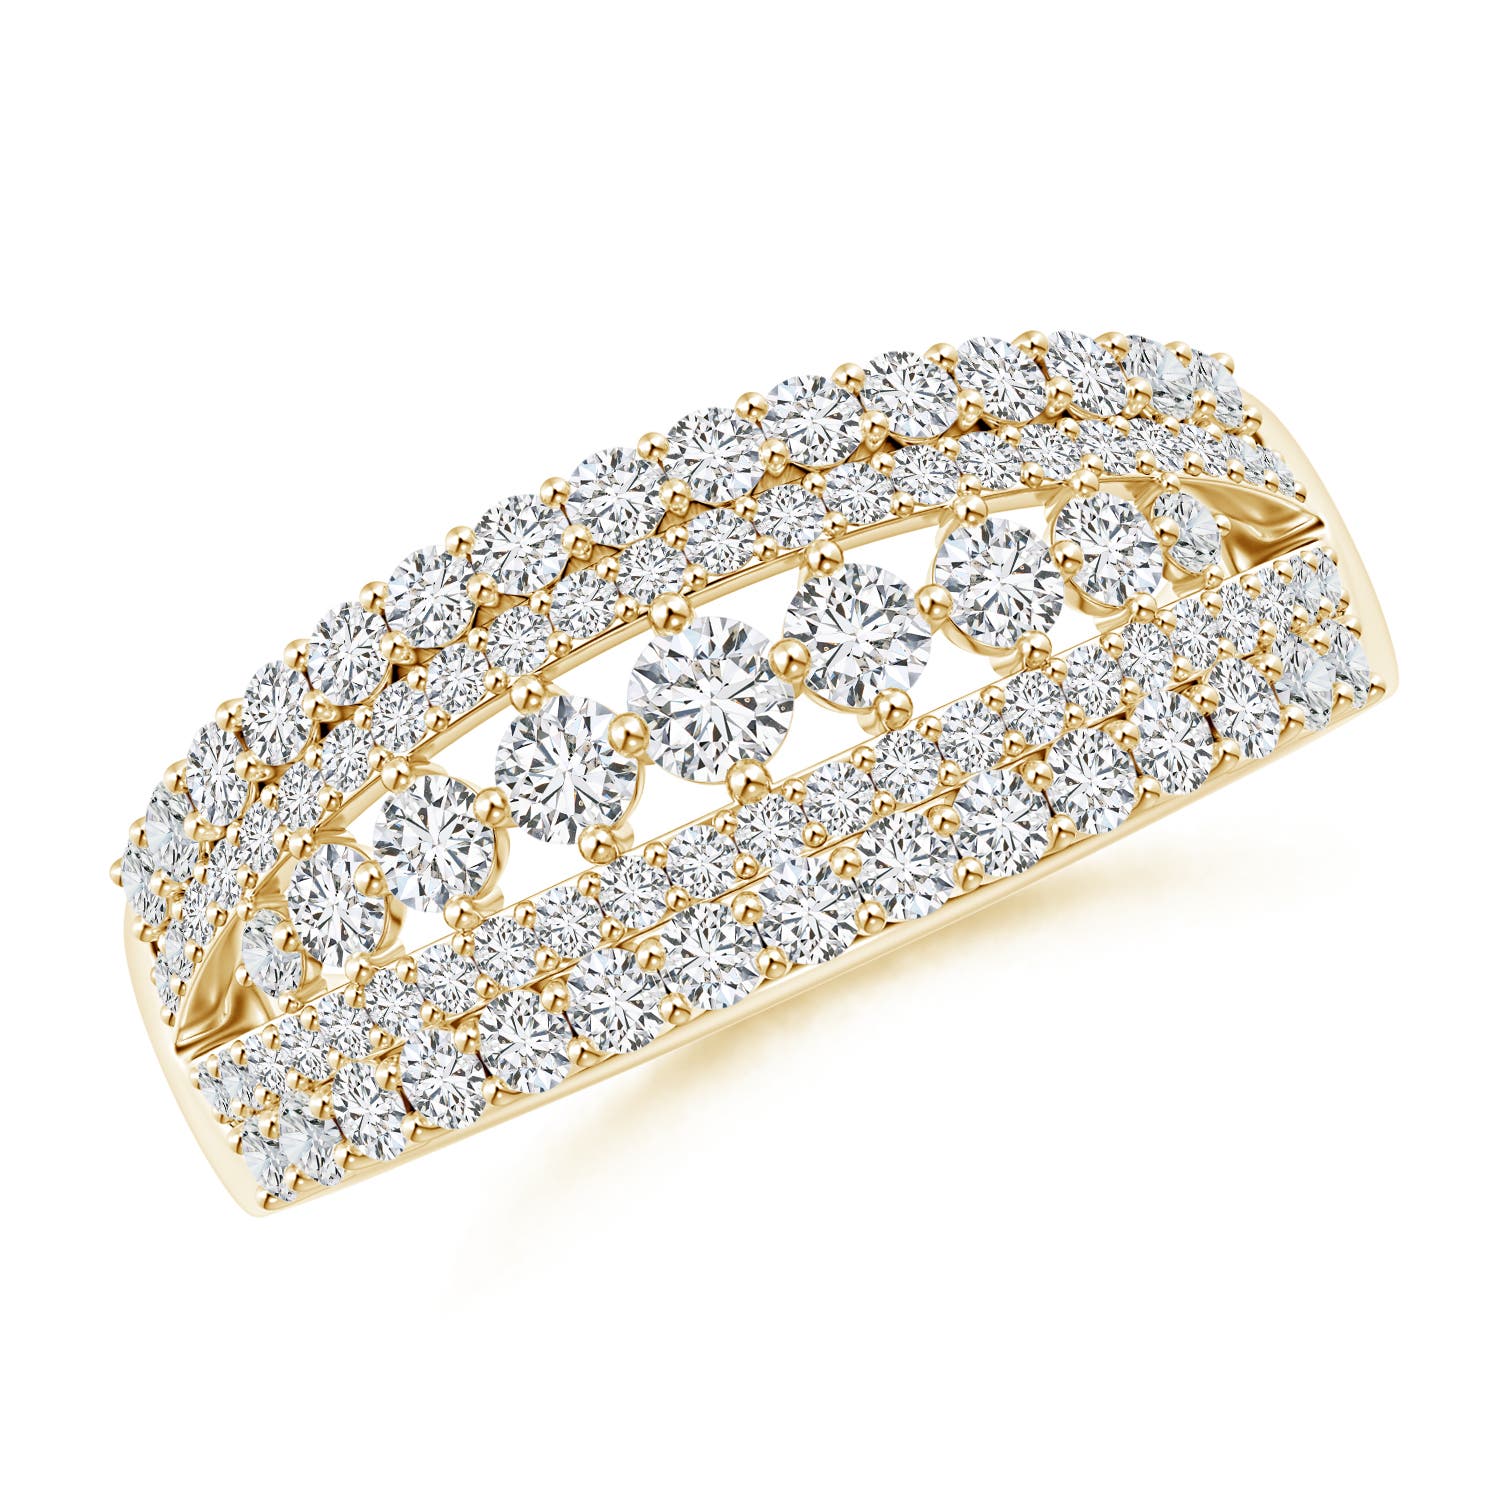 H, SI2 / 1.15 CT / 14 KT Yellow Gold